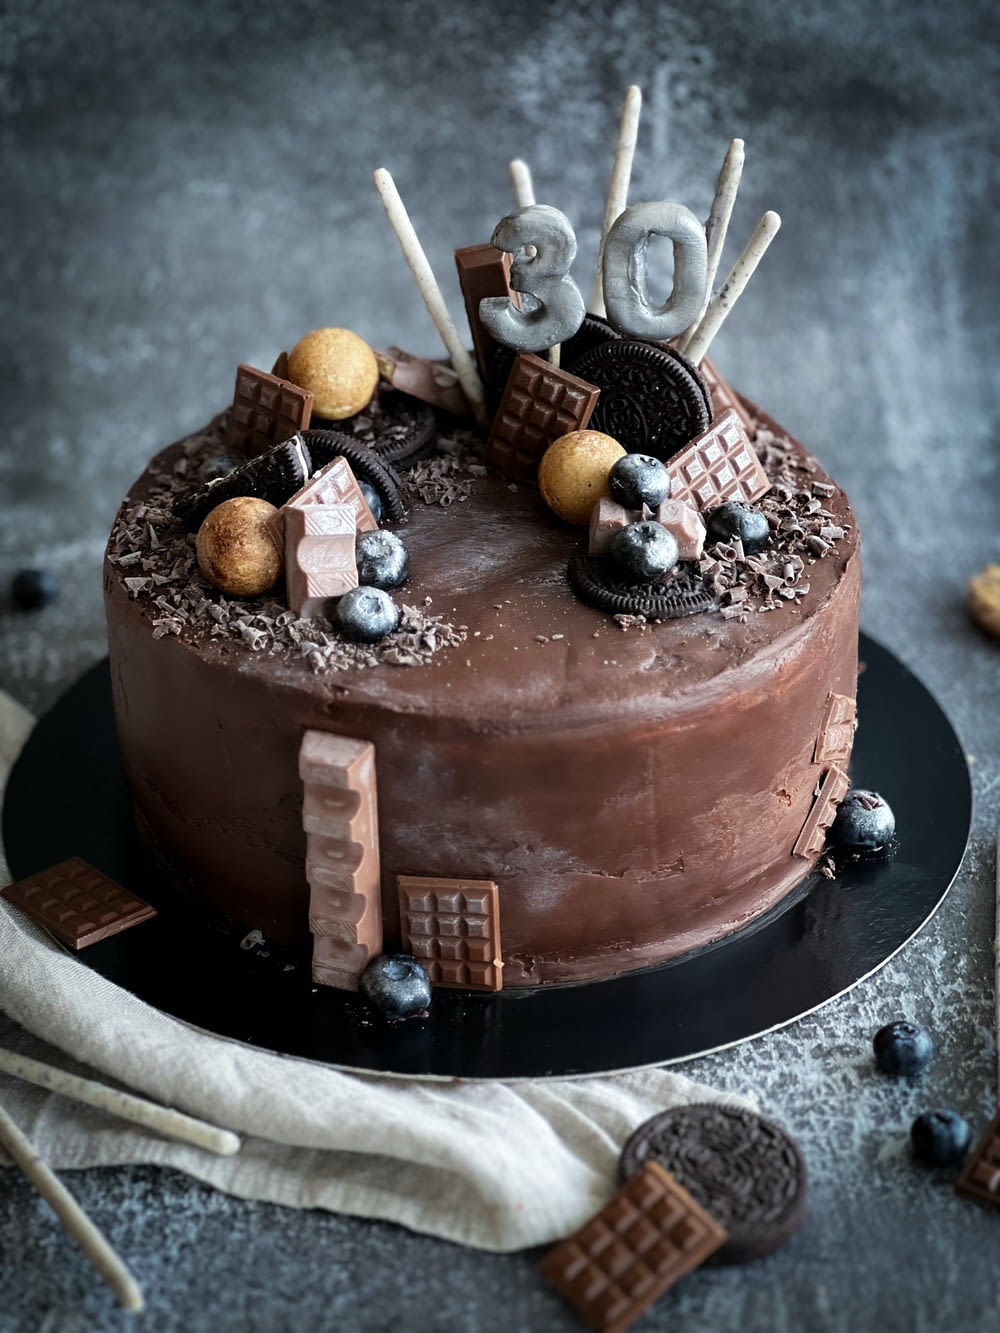 a chocolate cake decorated with chocolate candies and marshmallows